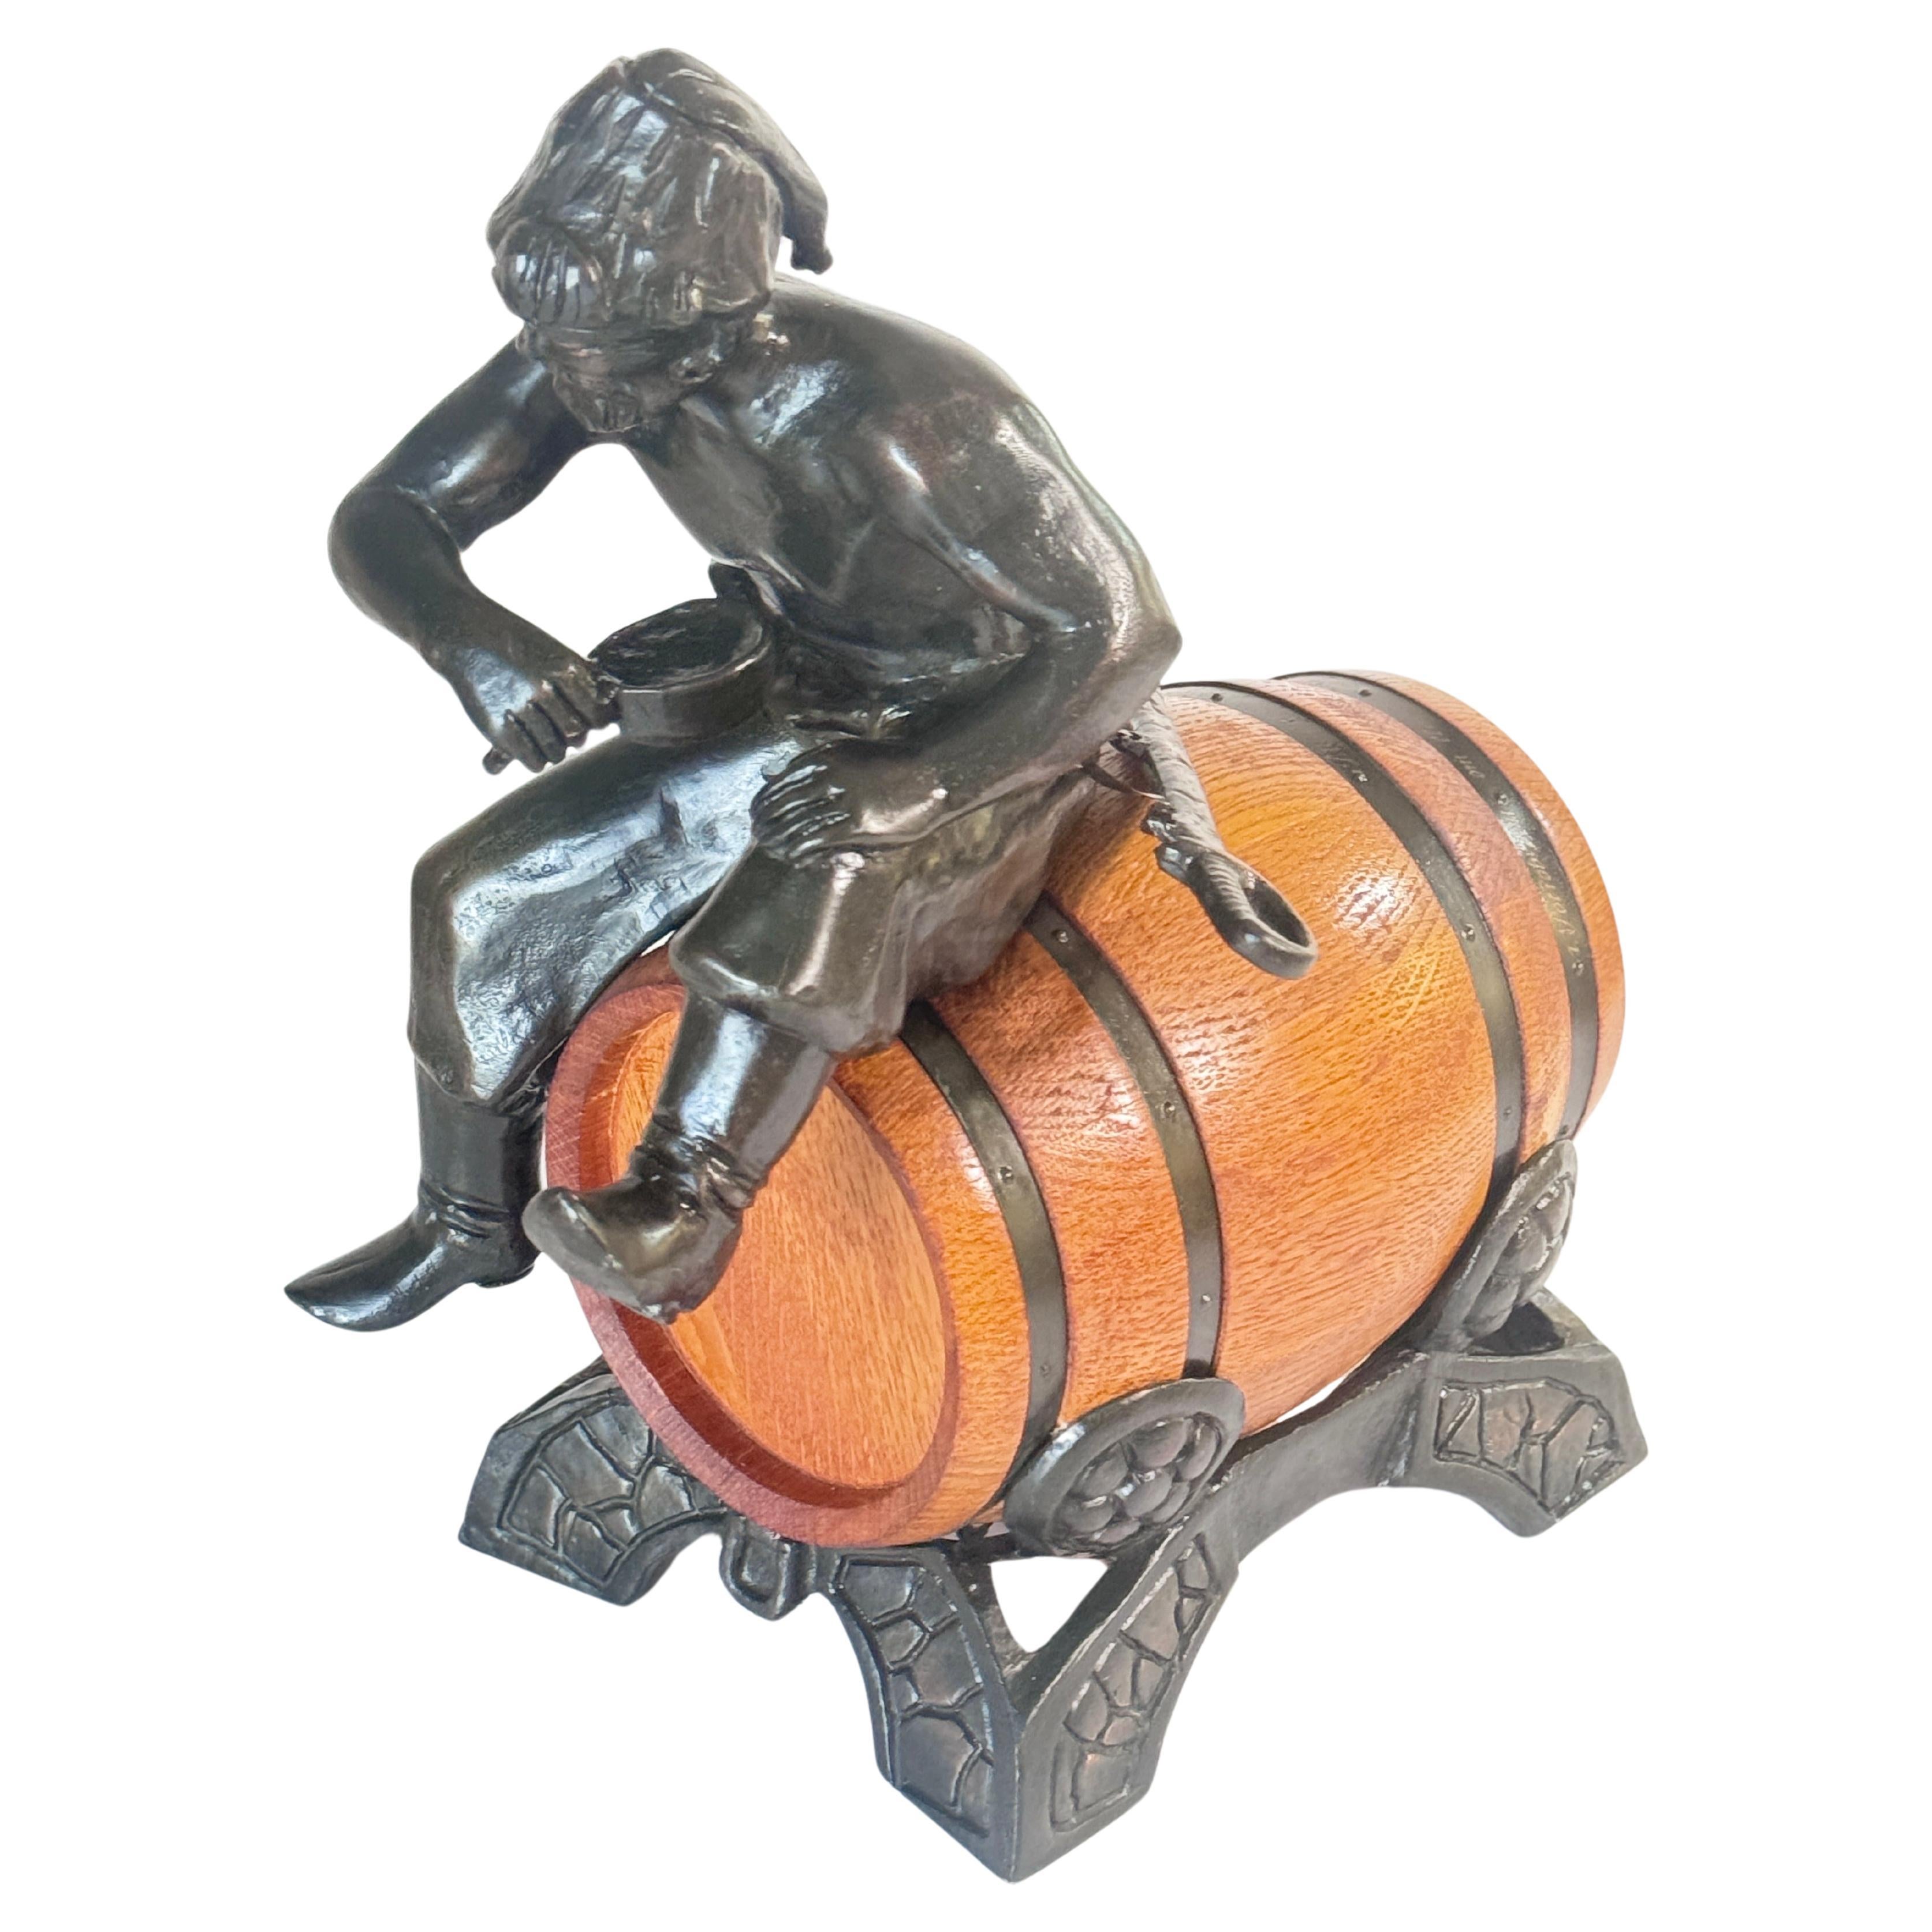  Oak and Brass Sailor’s Rum Barrel with Bronze sculpture of a Russian Cossack For Sale